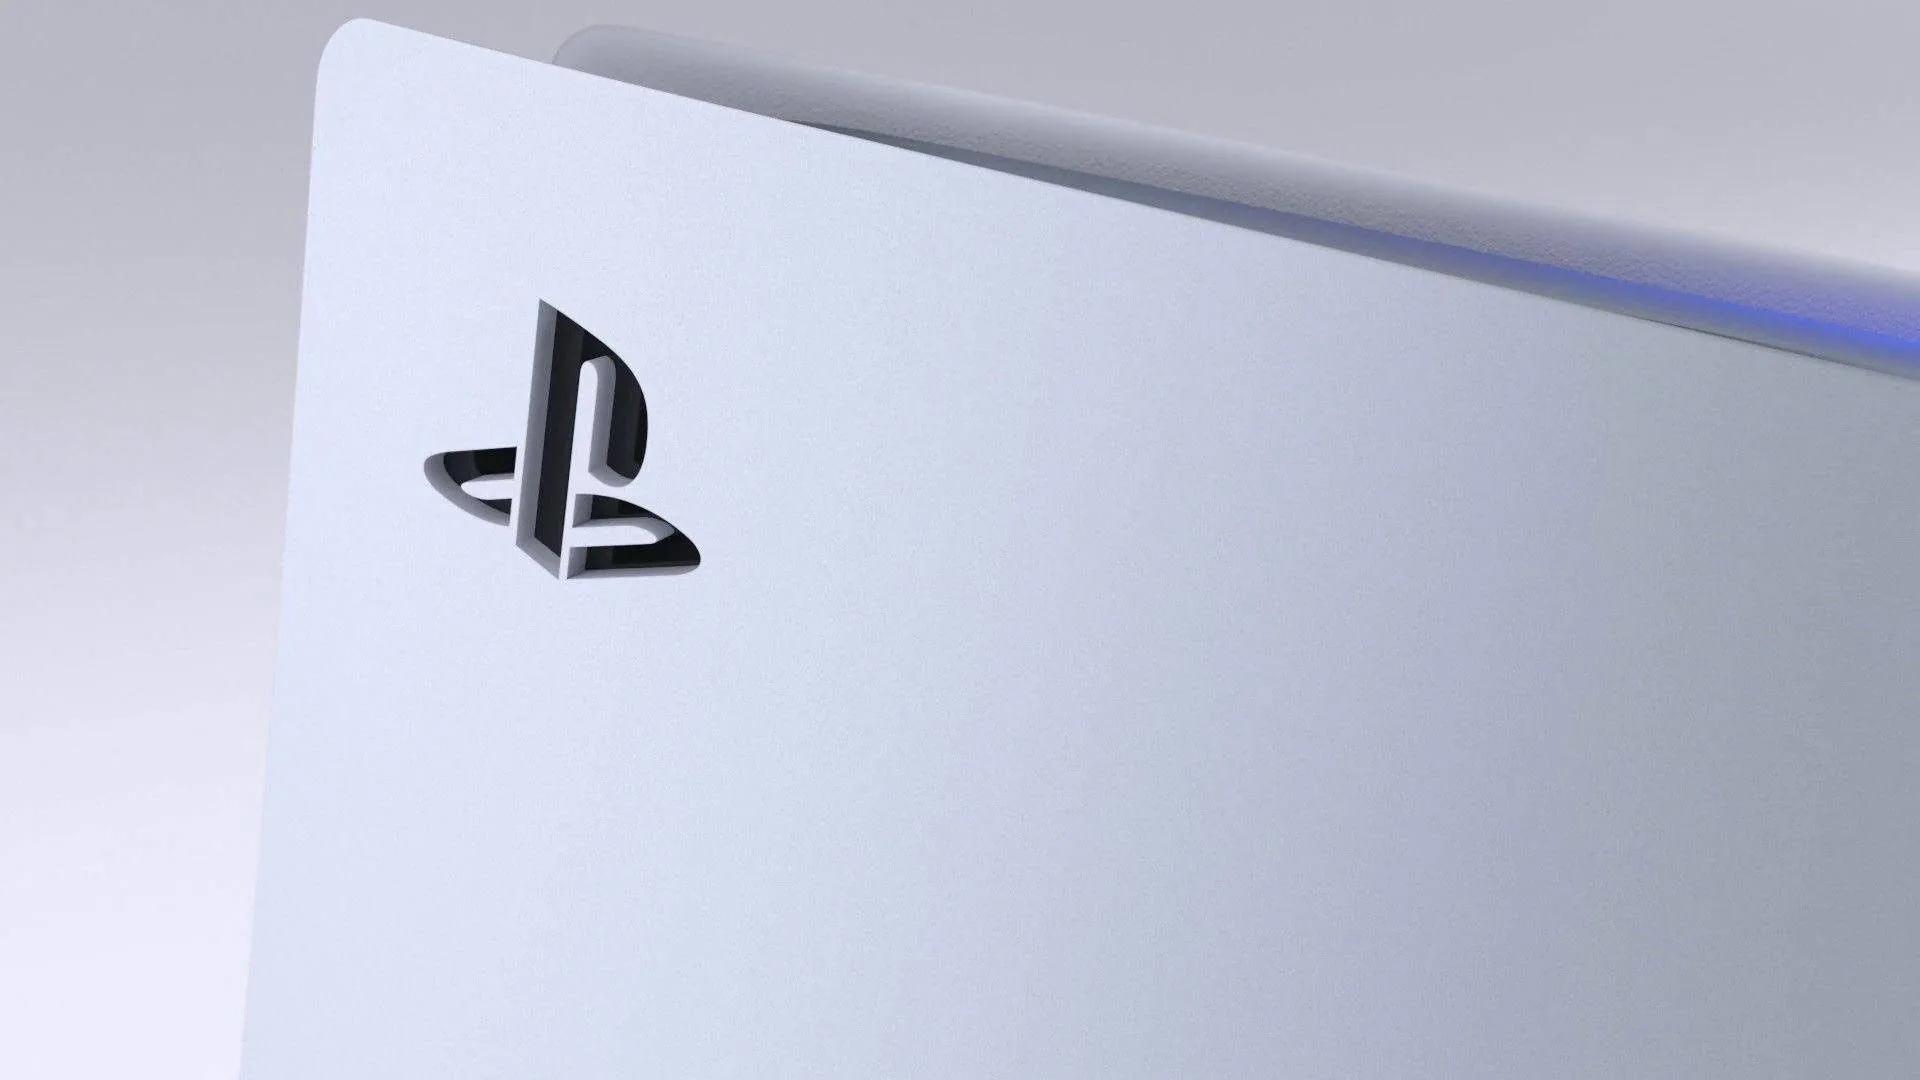 Revealed: PS5 Pro’s Technical Specifications, the Next Sony Console